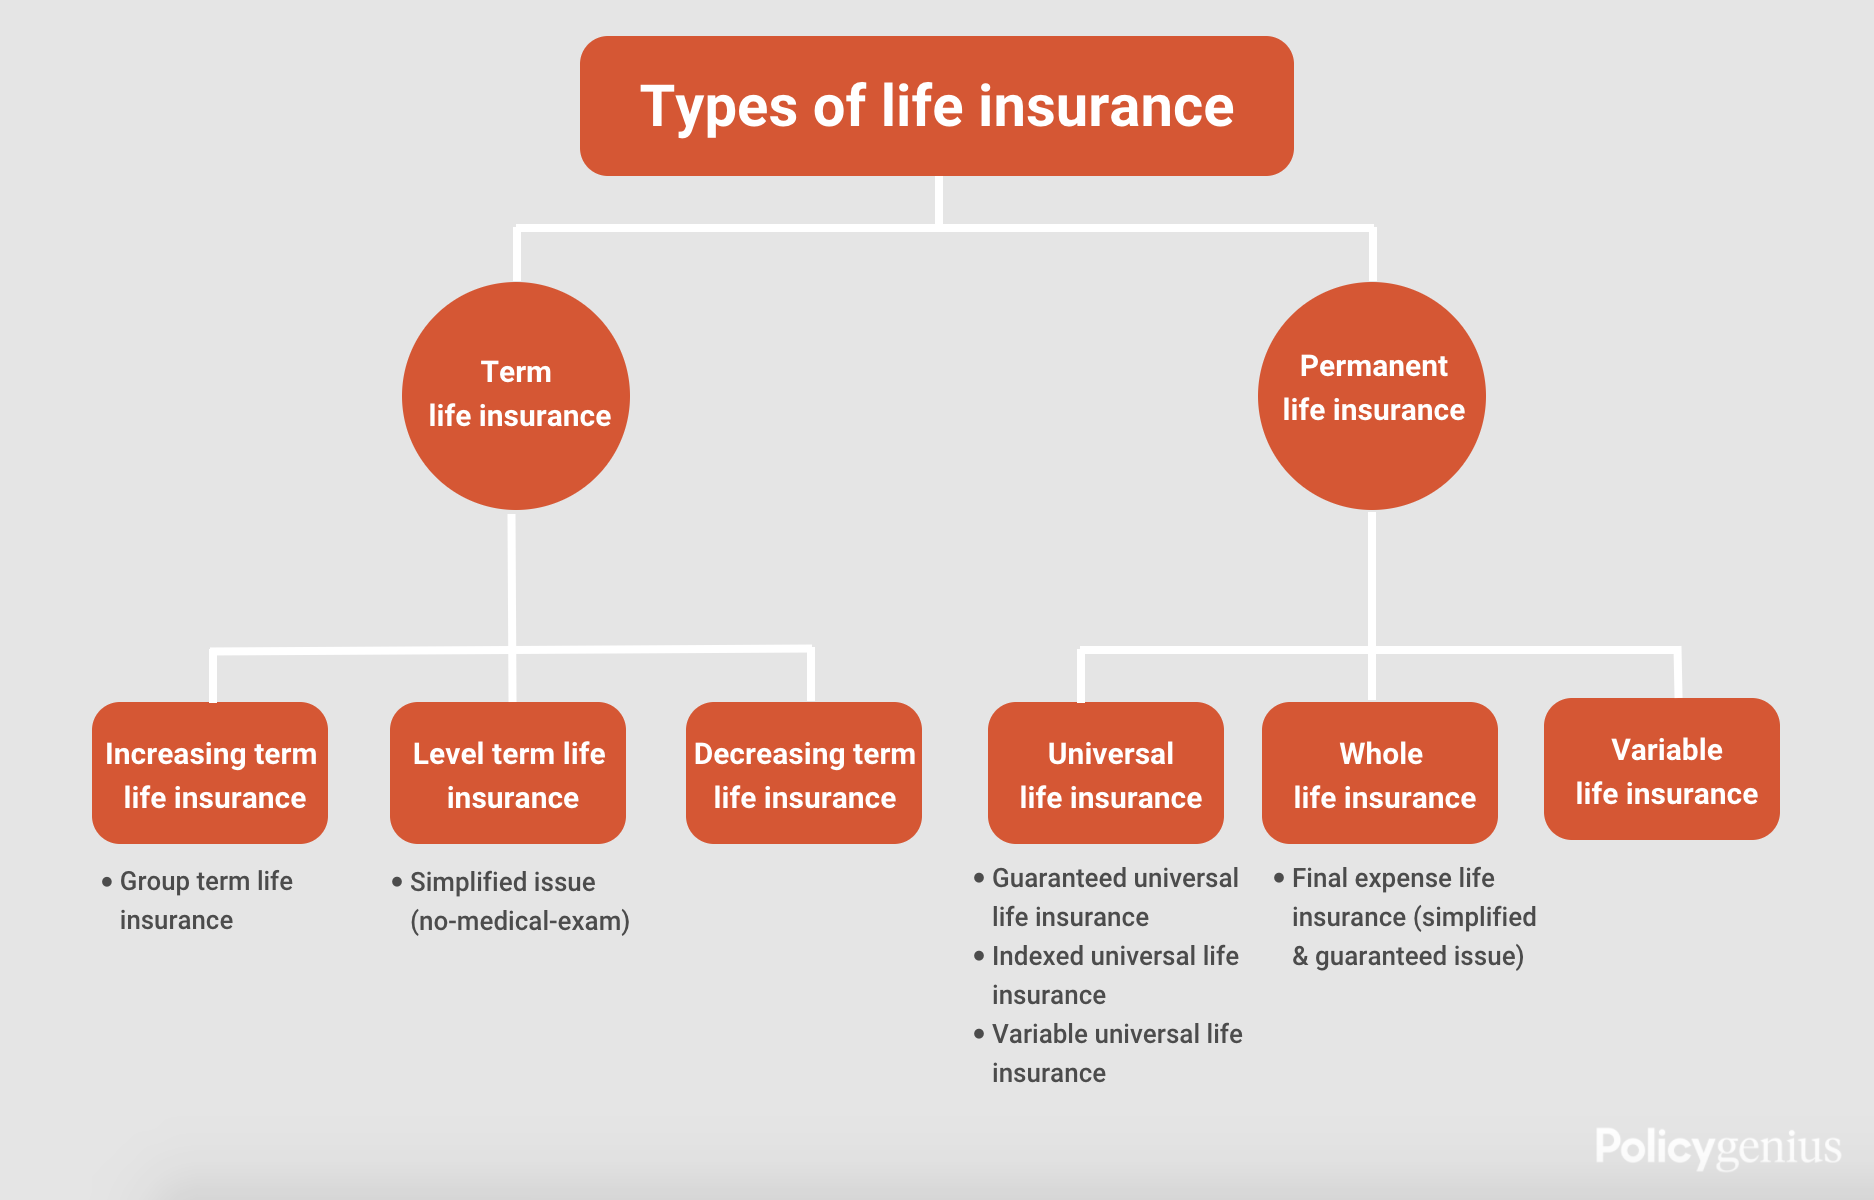 what are the different types of life insurance?